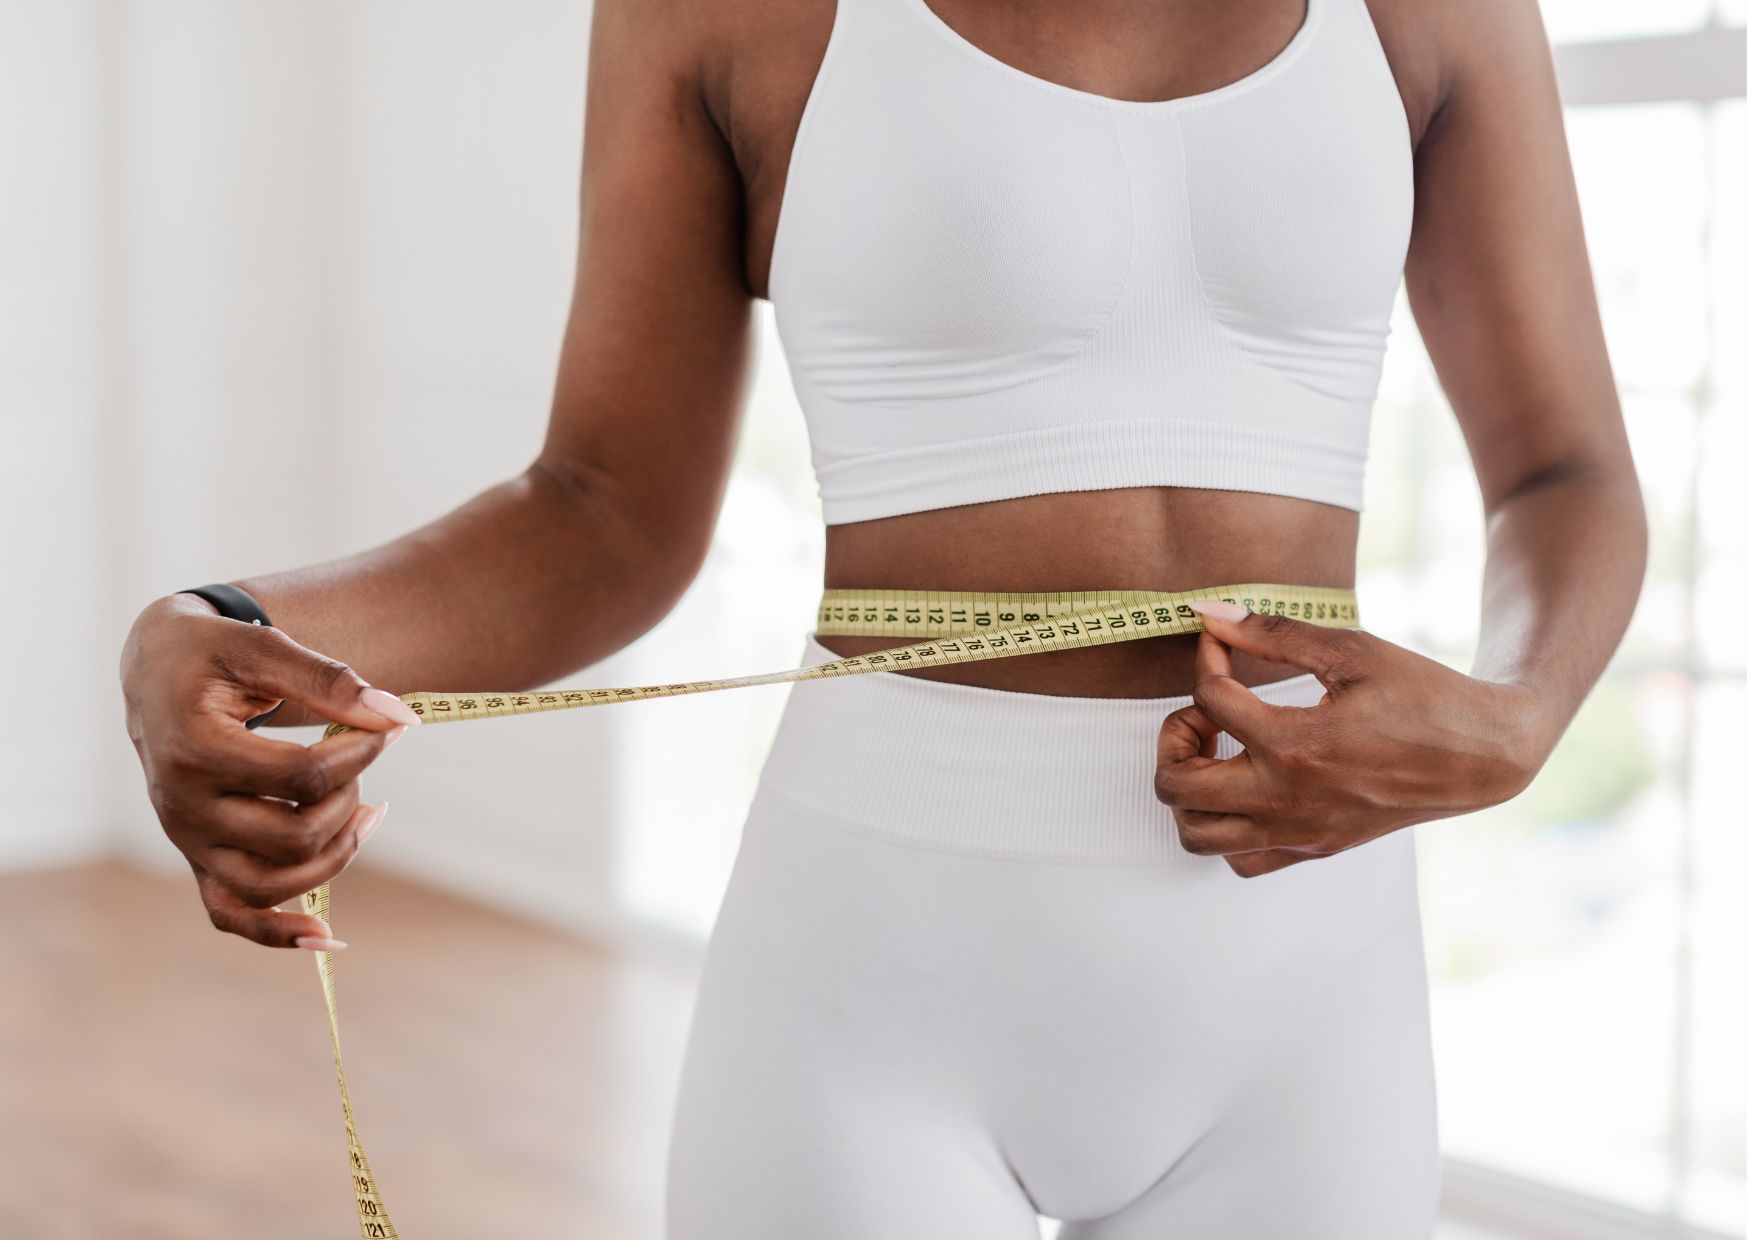 Tracking Weight Loss How To Take Body Measurements